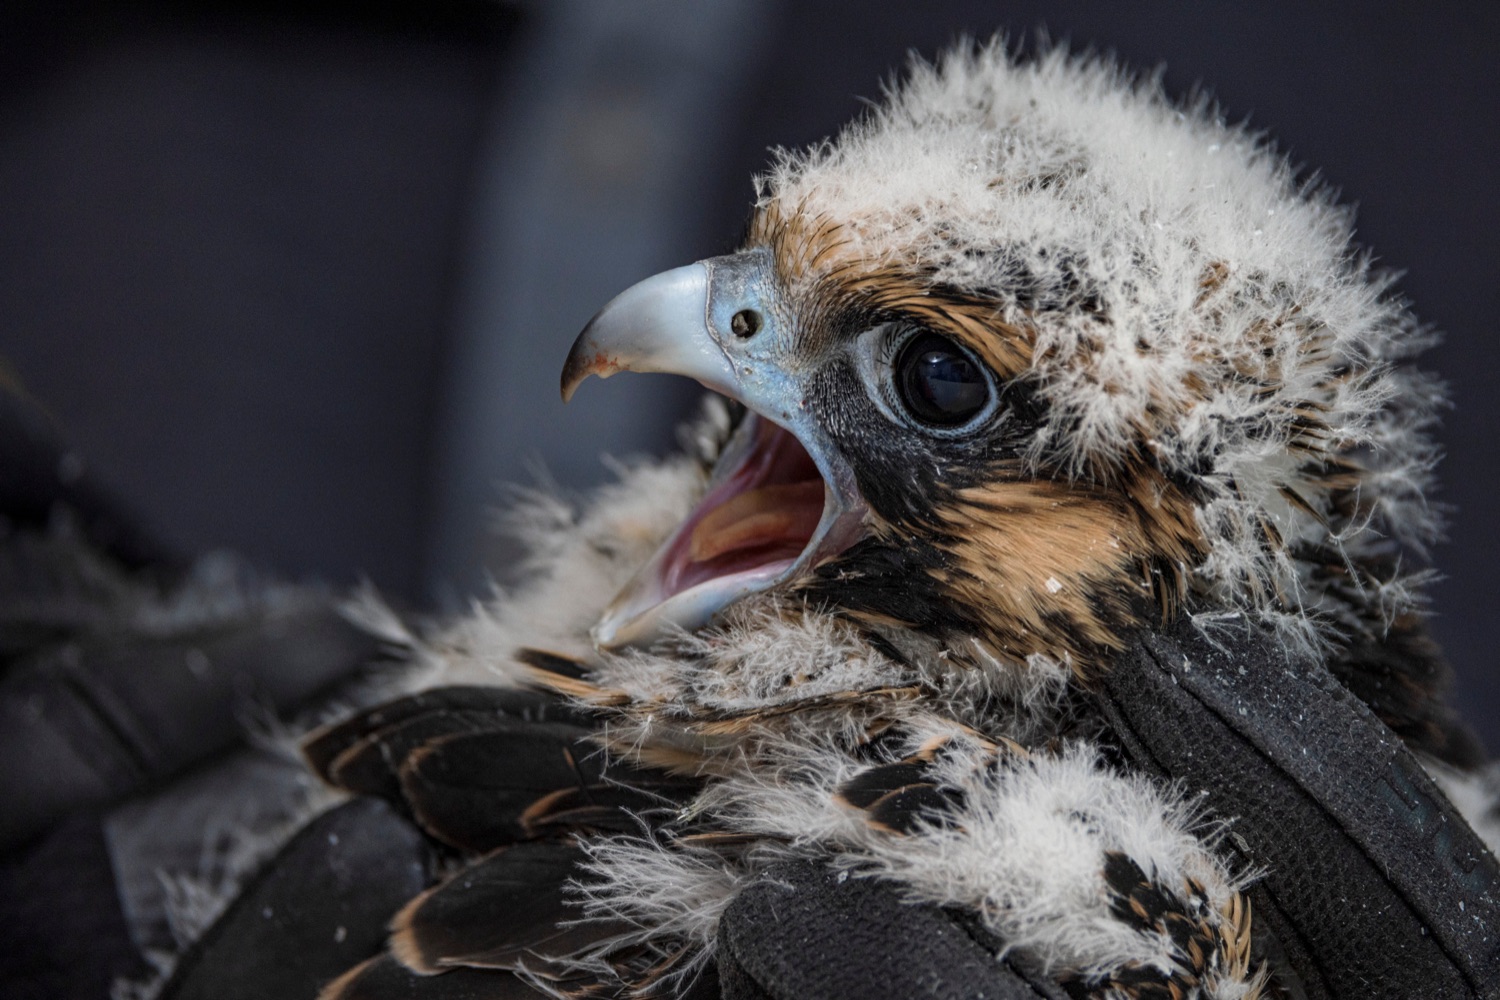 A peregrine falcon nestling is pictured during its health examination inside the Rachel Carson State Office Building on Wednesday, June 7, 2023. Banding the falcons allows biologists and birdwatchers from all over the continent to track the birds and help us learn more about where they travel, how long theyve lived, and whether they'll establish new nests in other places. Falcons born on the ledge at the Rachel Carson building have been tracked to locations from Florida all the way to Canada.<br><a href="https://filesource.amperwave.net/commonwealthofpa/photo/23186_DEP_FalconBanding_NK_004.jpg" target="_blank">⇣ Download Photo</a>